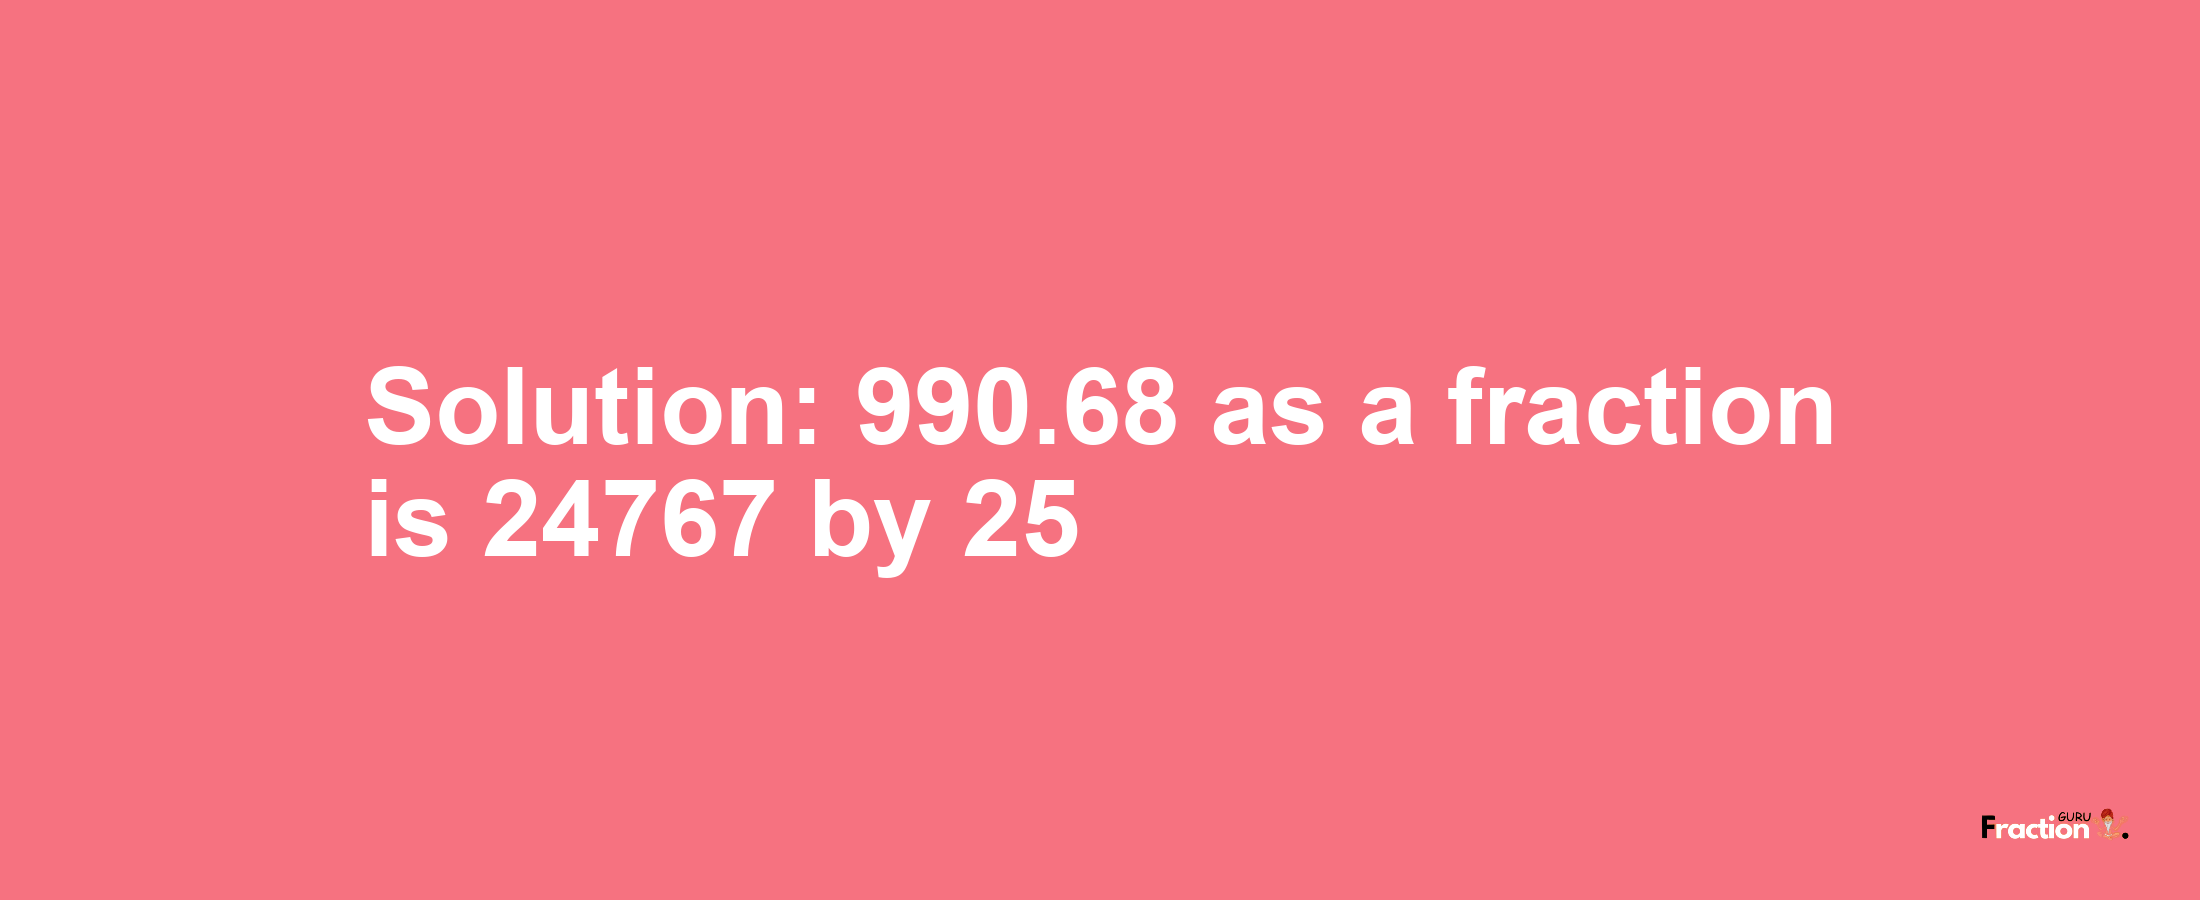 Solution:990.68 as a fraction is 24767/25